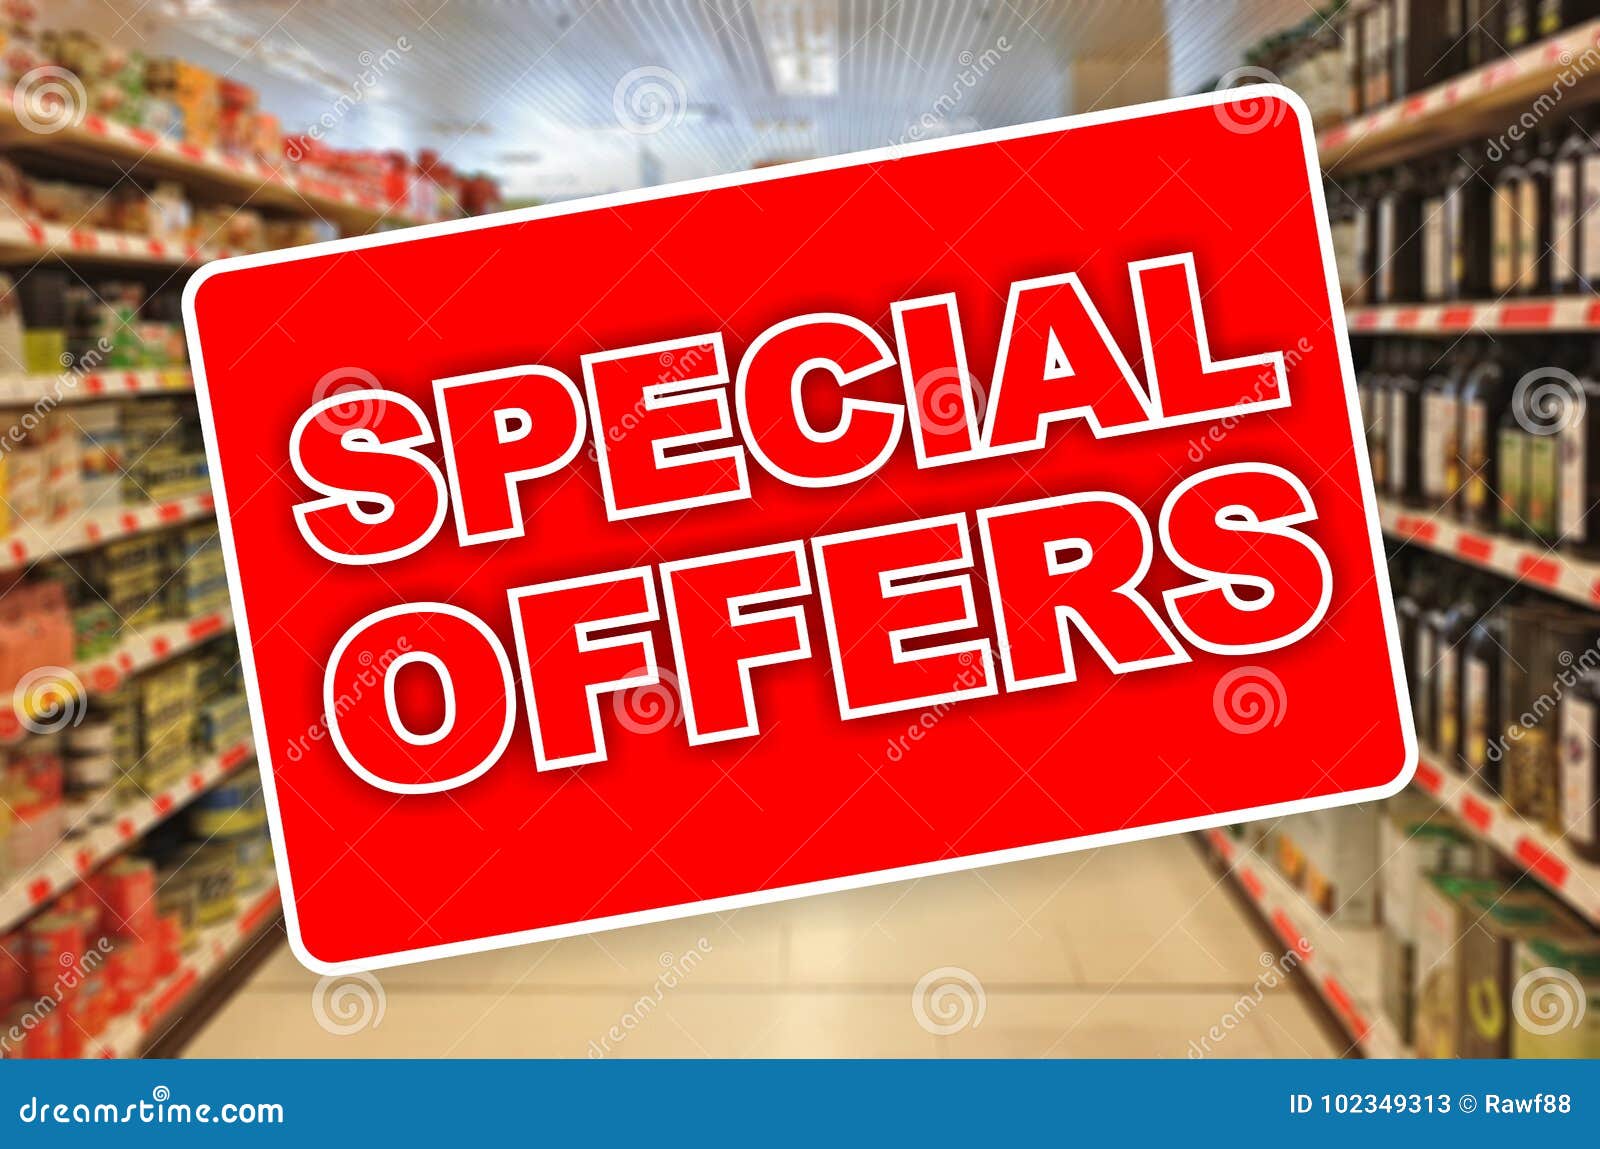 special offers red label on an abstract supermarket background